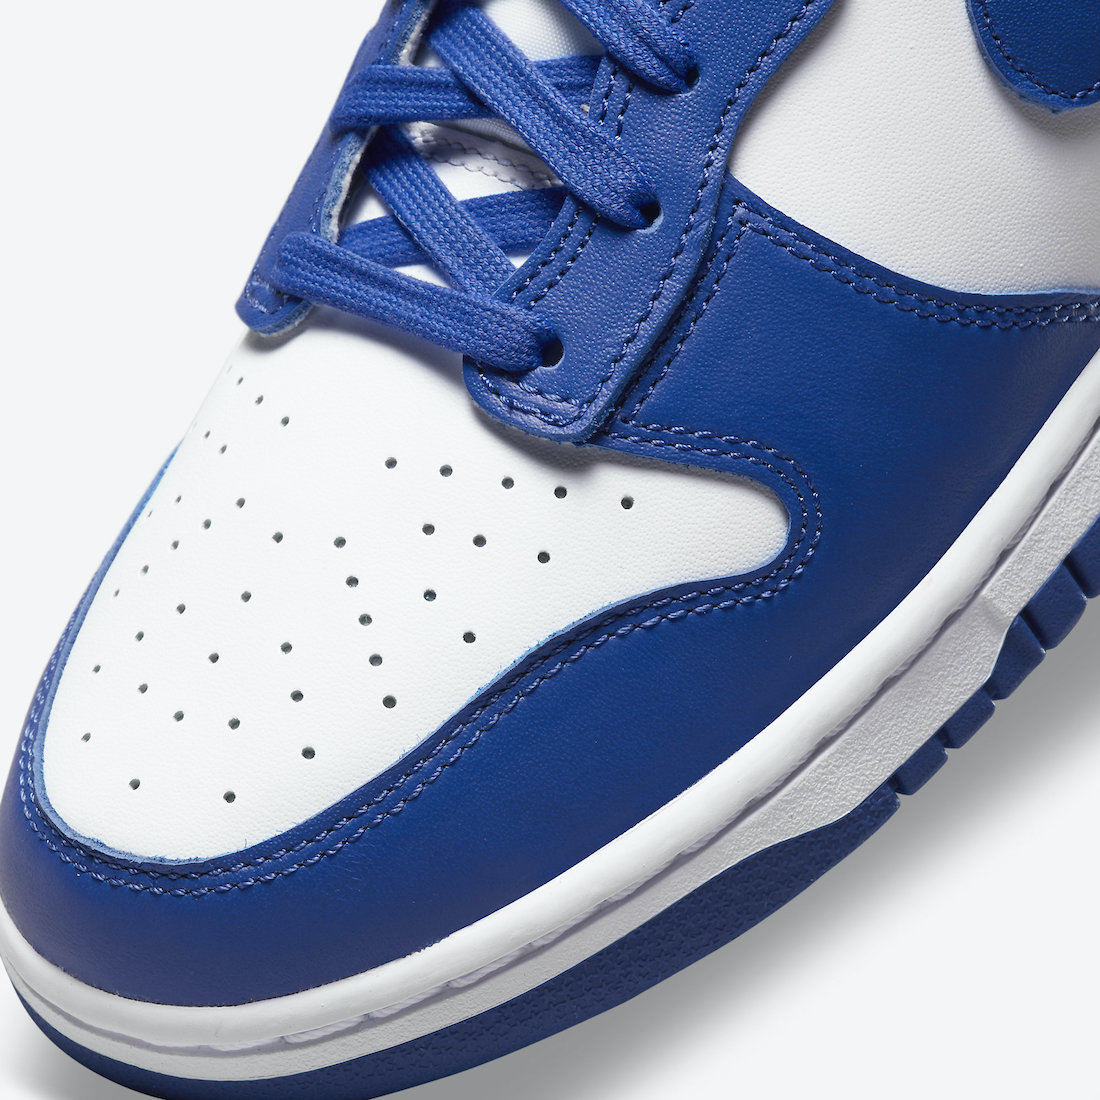 Nike-Dunk-High-Game-Royal-DD1399-102-Release-Date-Price-6